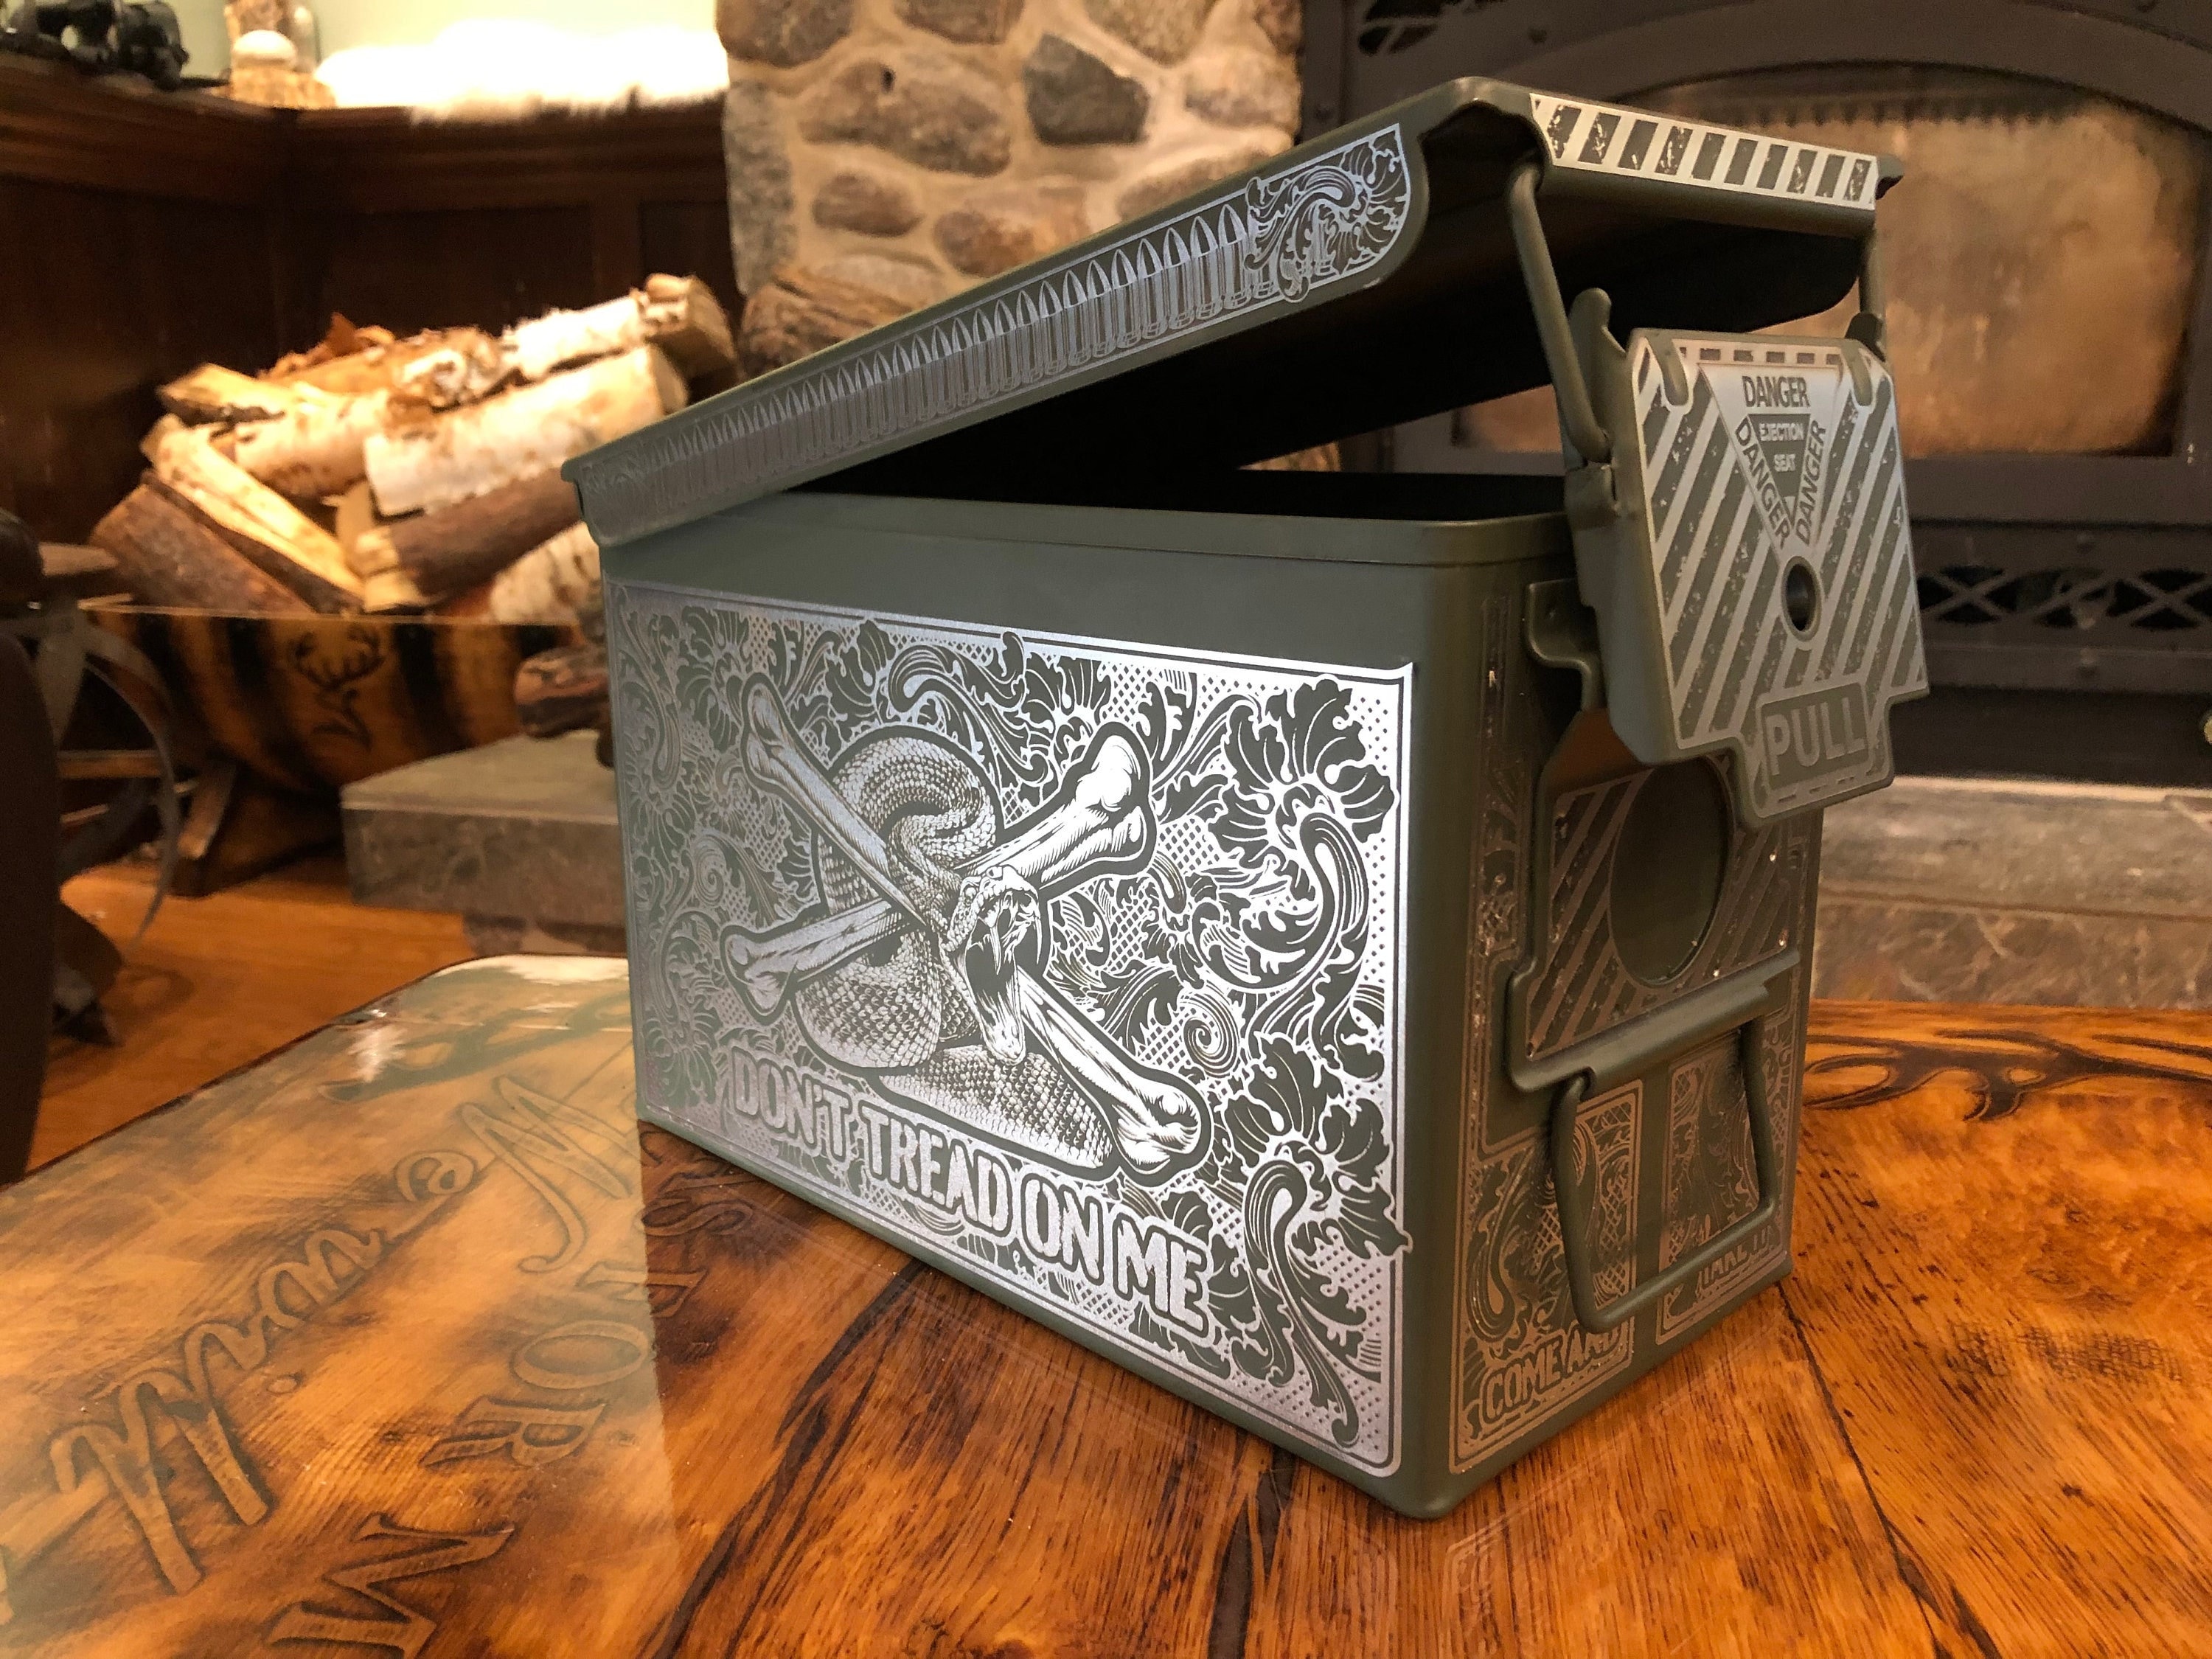 Personalized Metal Ammo Box - The Man Registry